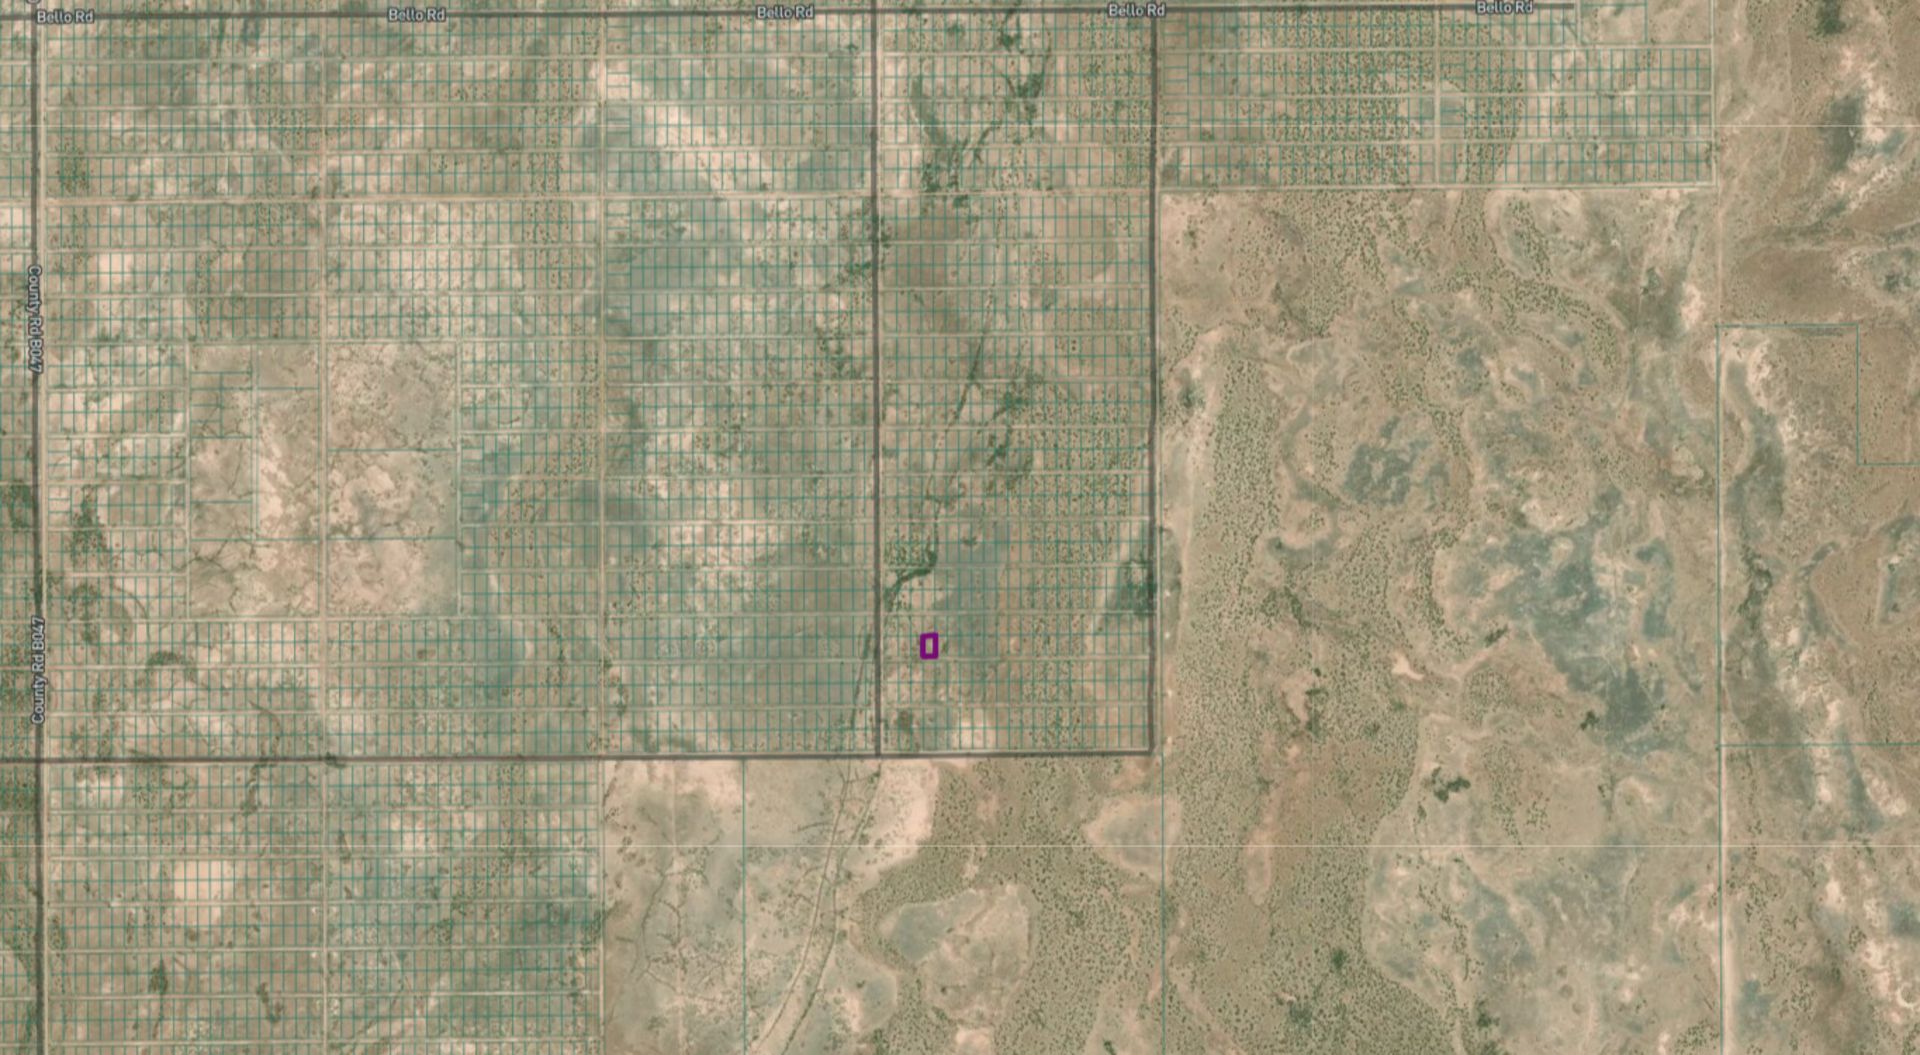 Claim Your Half-Acre Slice of Luna County, New Mexico! - Image 10 of 15